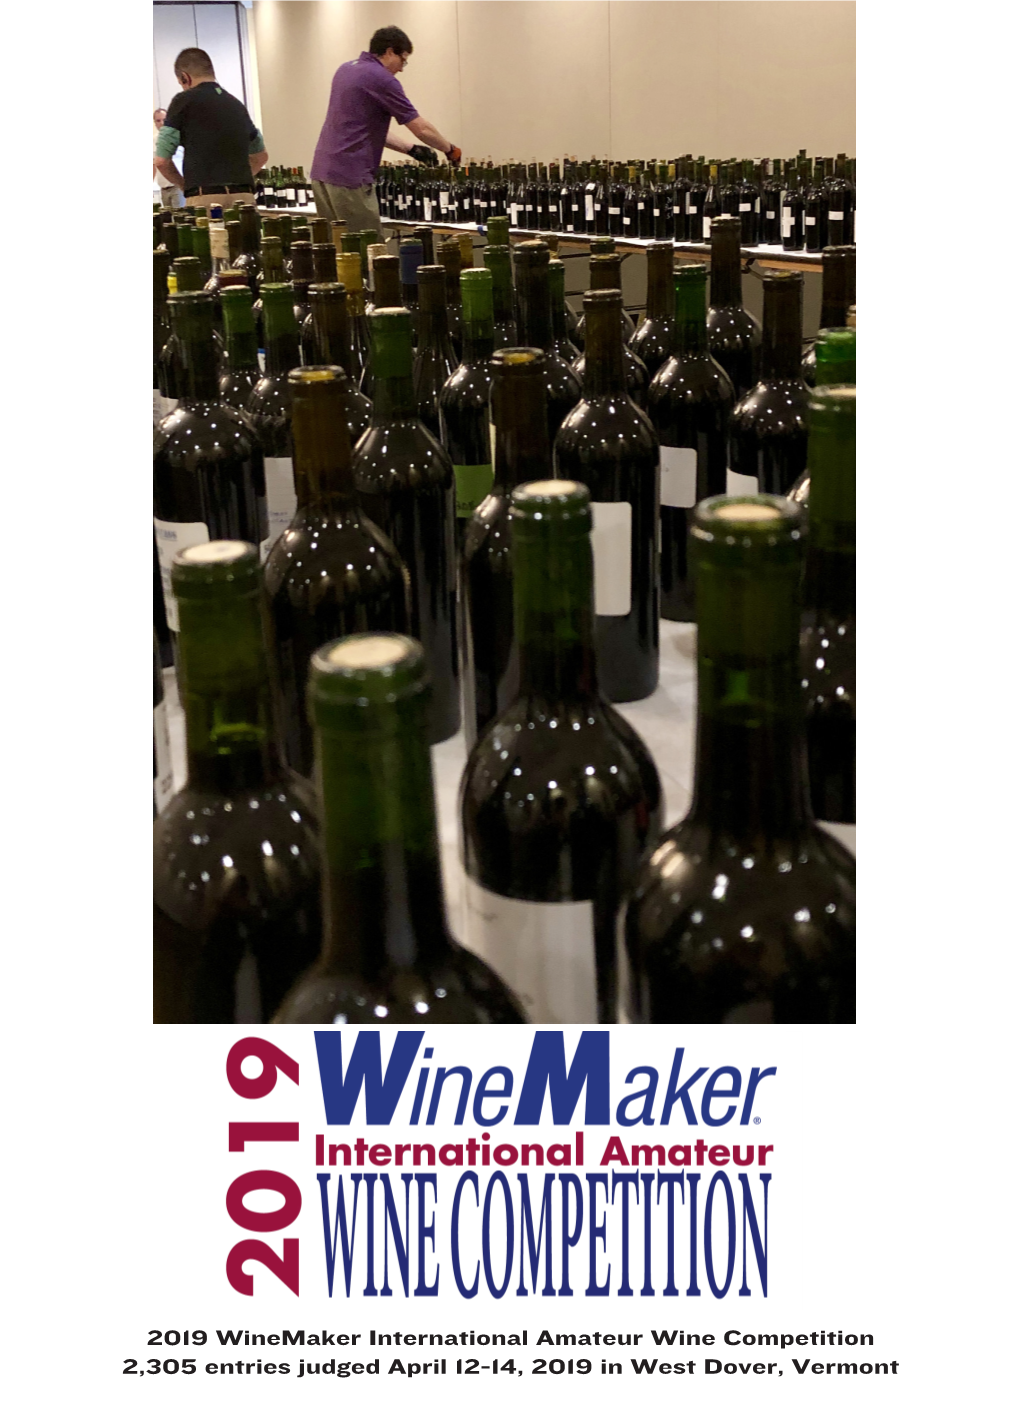 2019 Winemaker International Amateur Wine Competition 2,305 Entries Judged April 12-14, 2019 in West Dover, Vermont 2,305